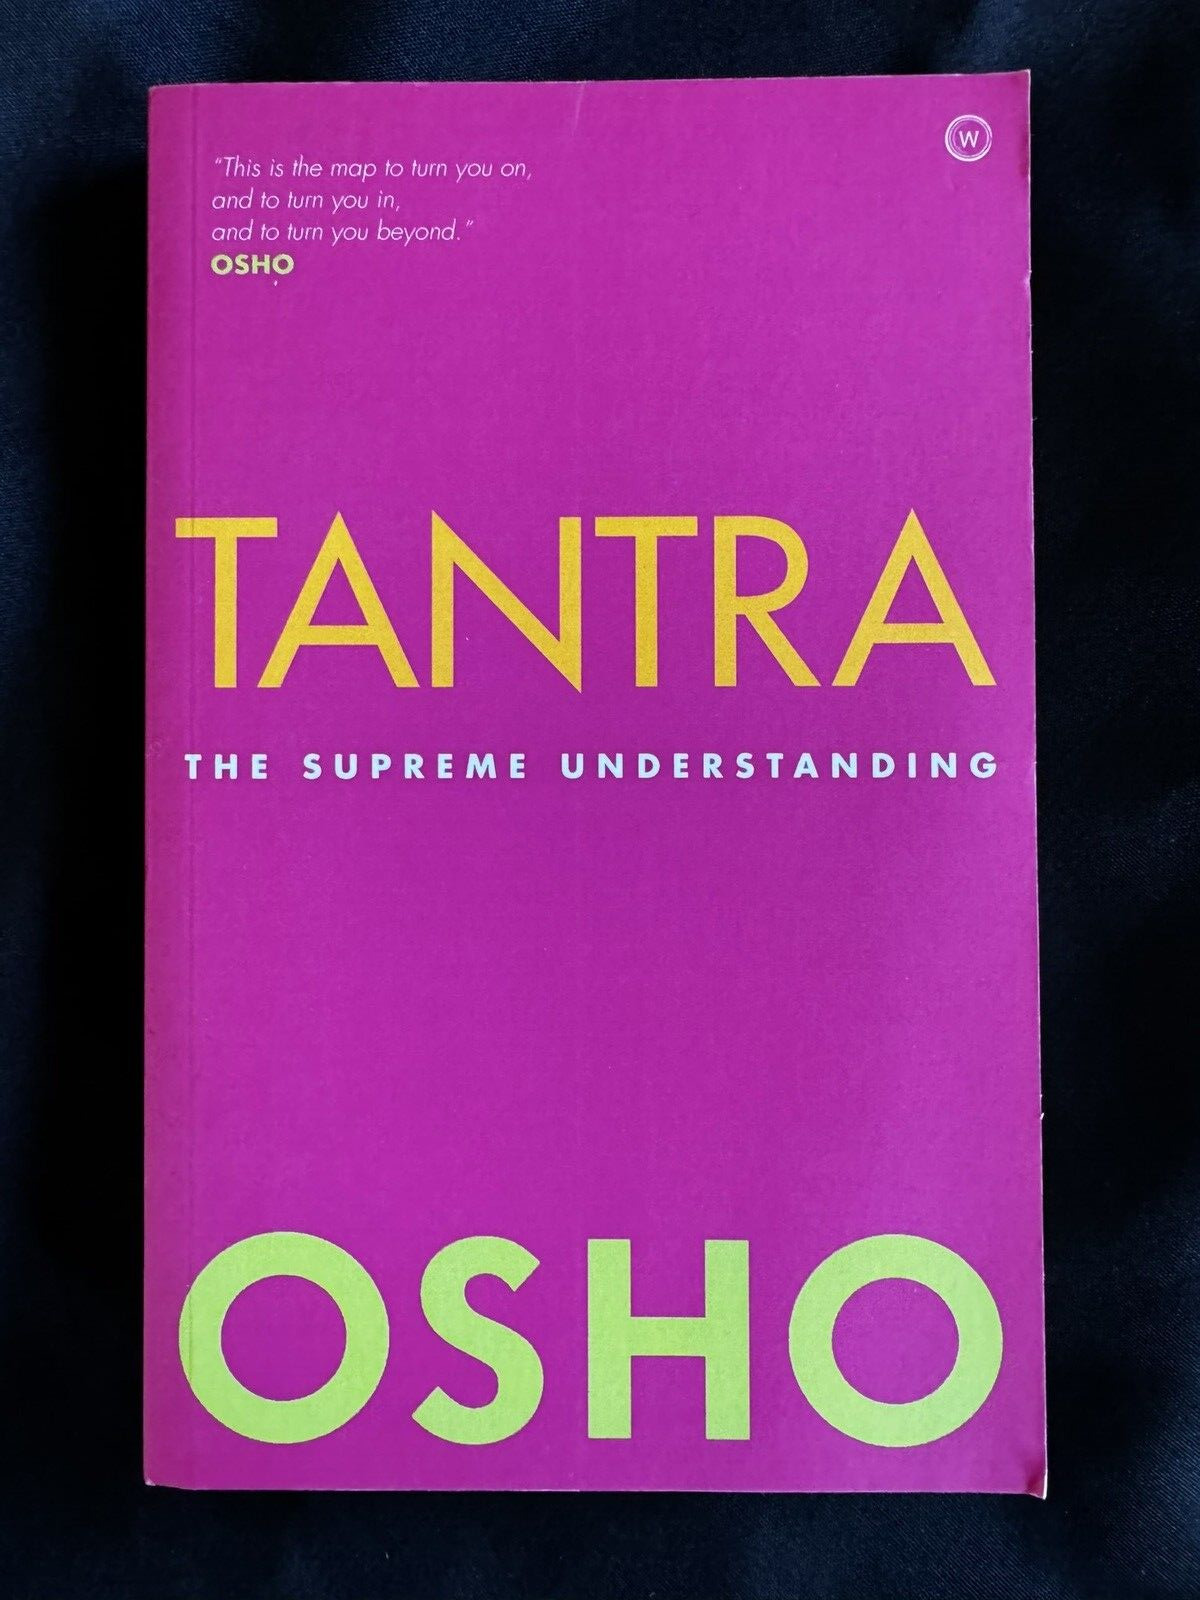 TANTRA by OSHO The Supreme Understanding  Paperback book NEW